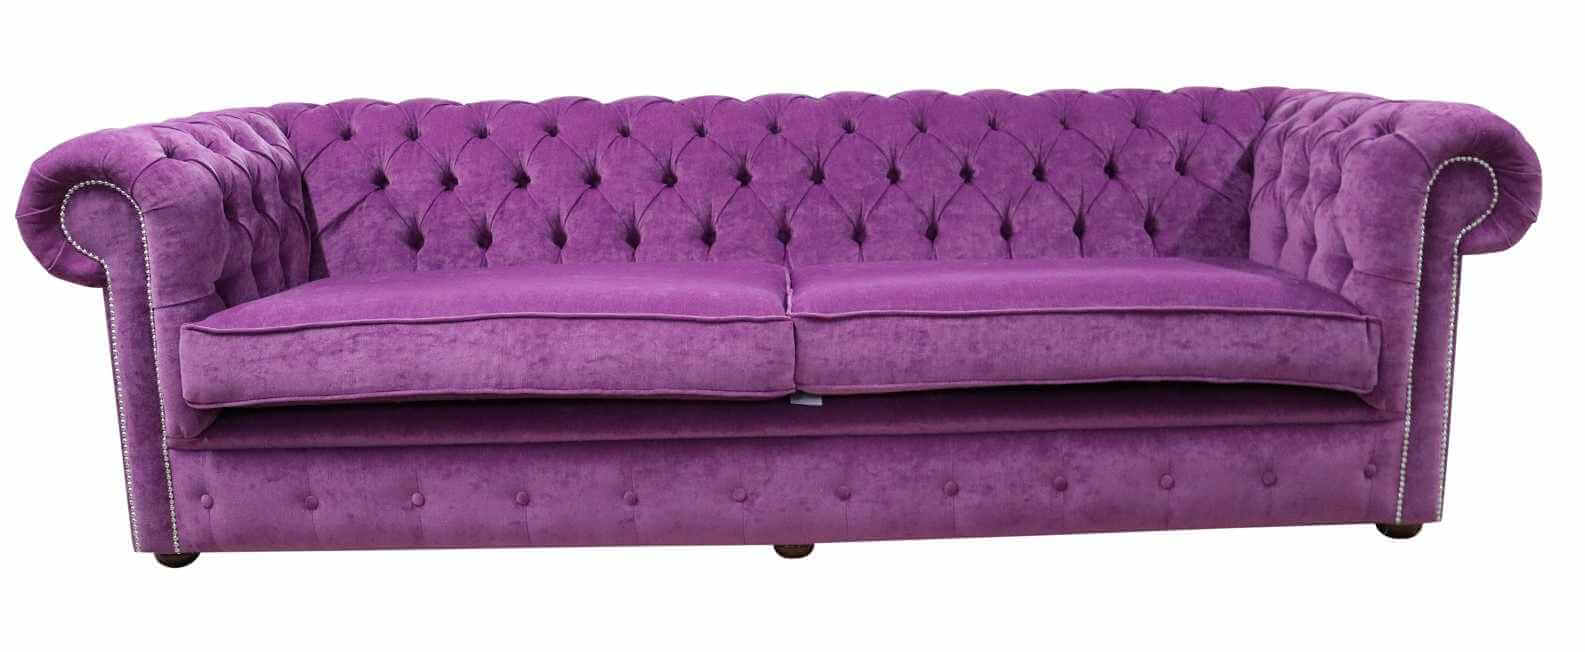 The Chesterfield More Than Just a Sofa  %Post Title